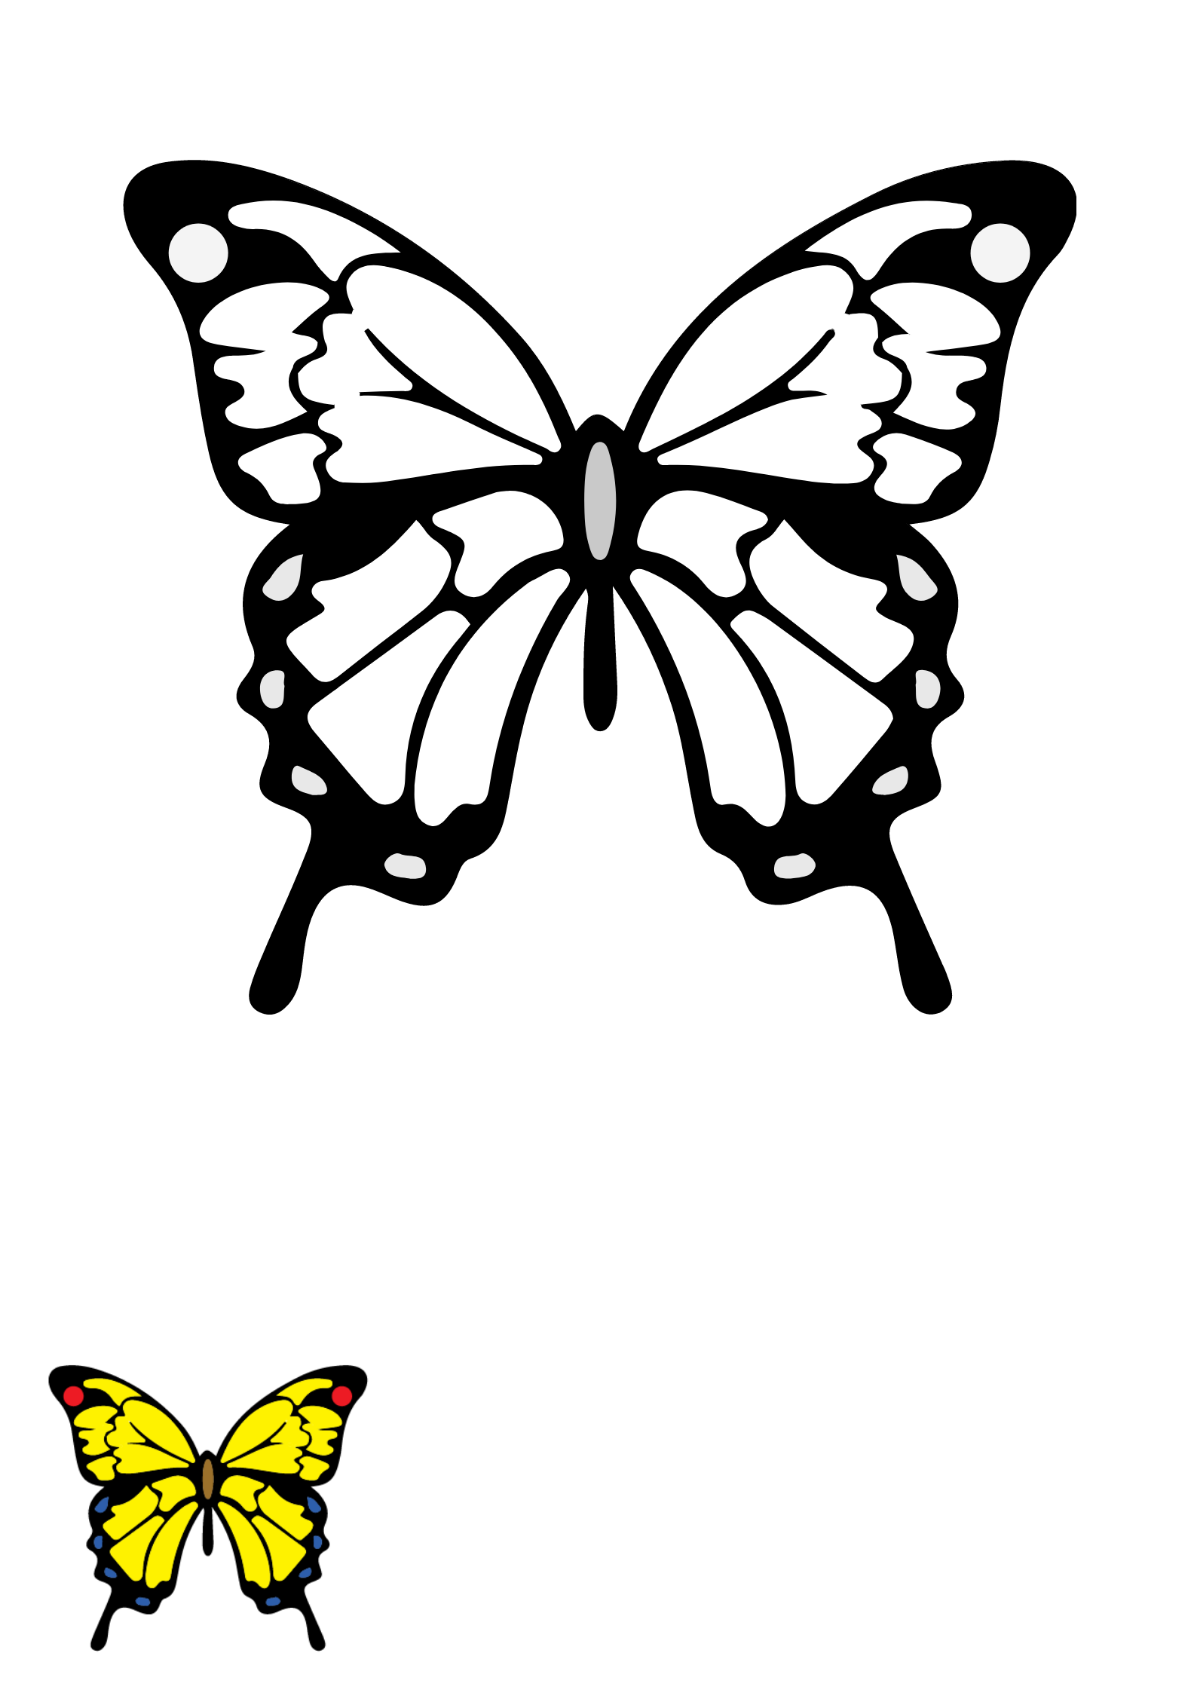 Swallowtail Butterfly Coloring Page Template